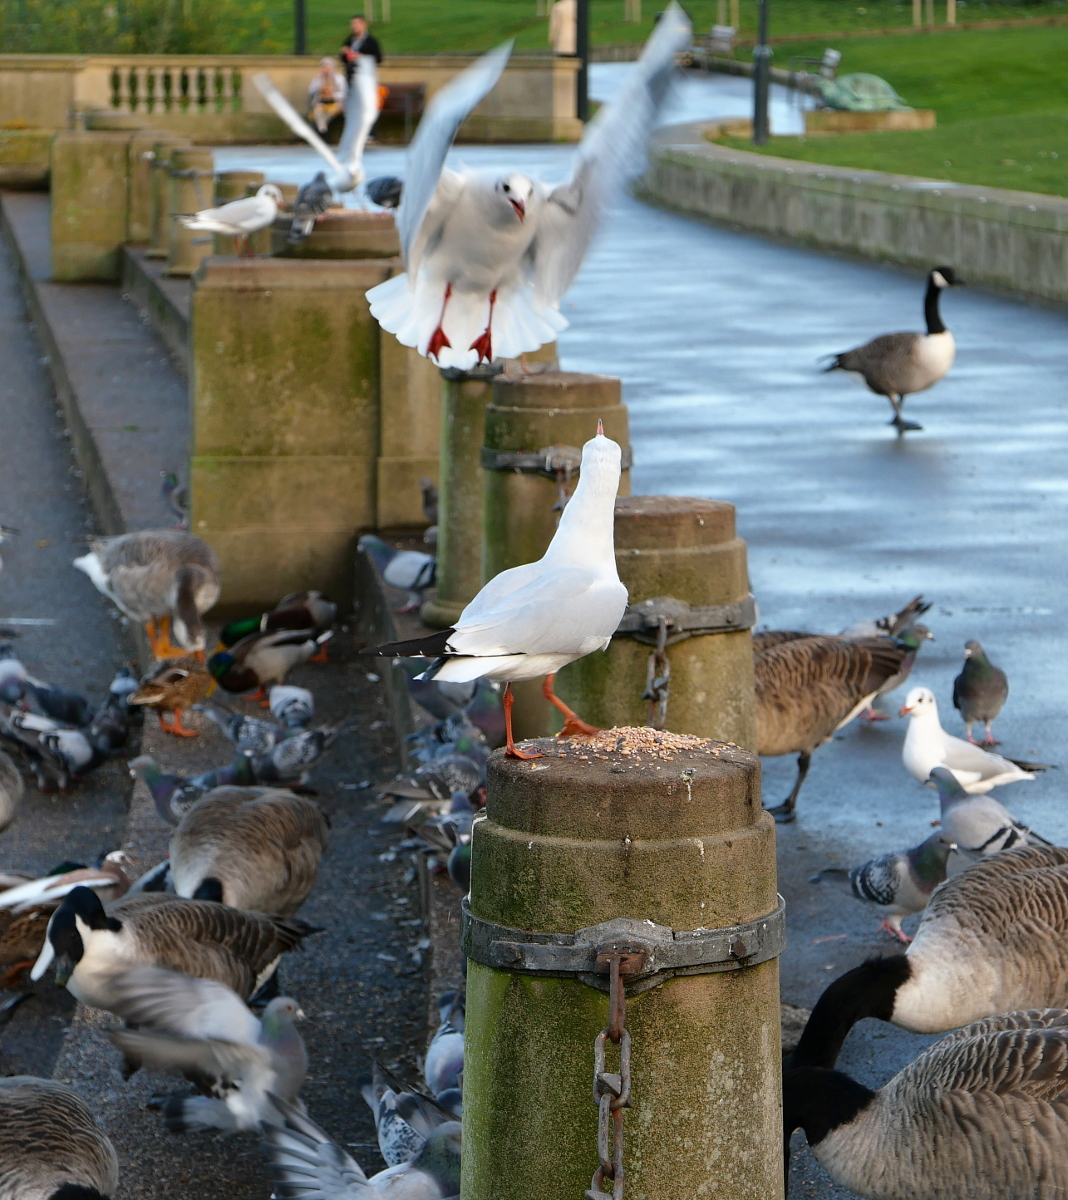 Derby: Some Gulls fighting over territory for food River Gardens 20221015 Copyright (c)2022 Paul Alan Grosse. All Rights Reserved.